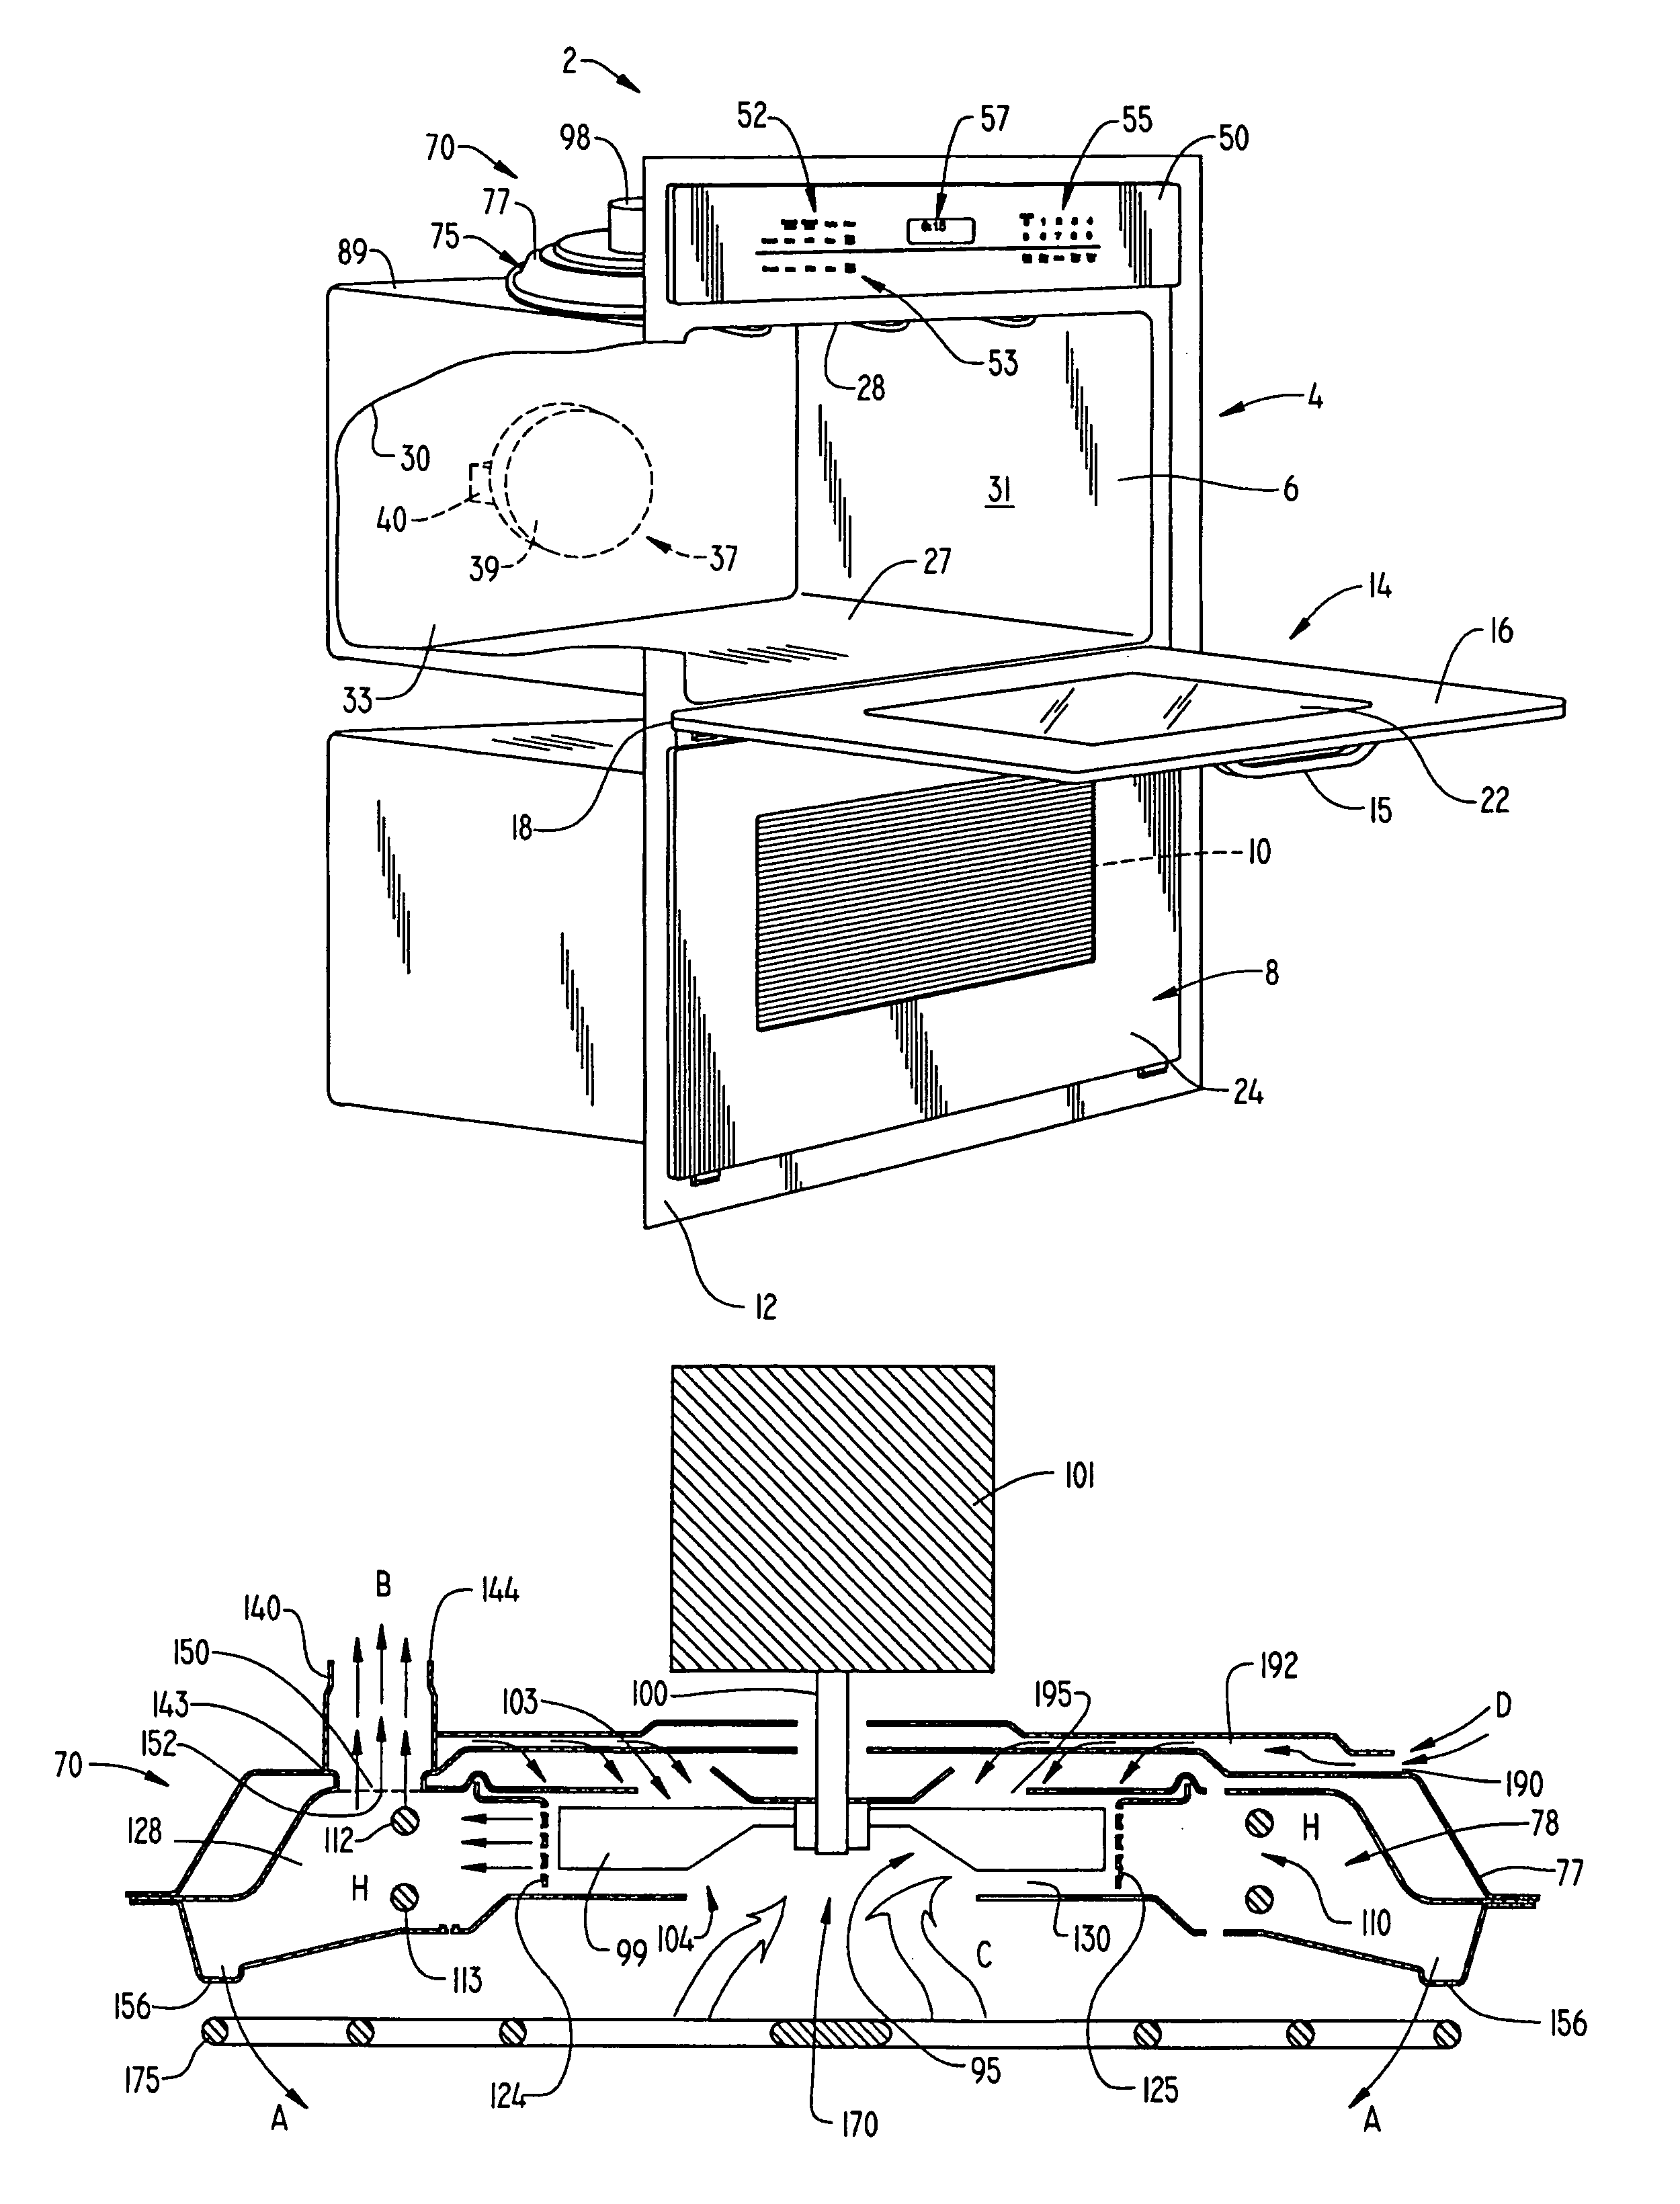 Pressure exhaust system for a convection cooking appliance